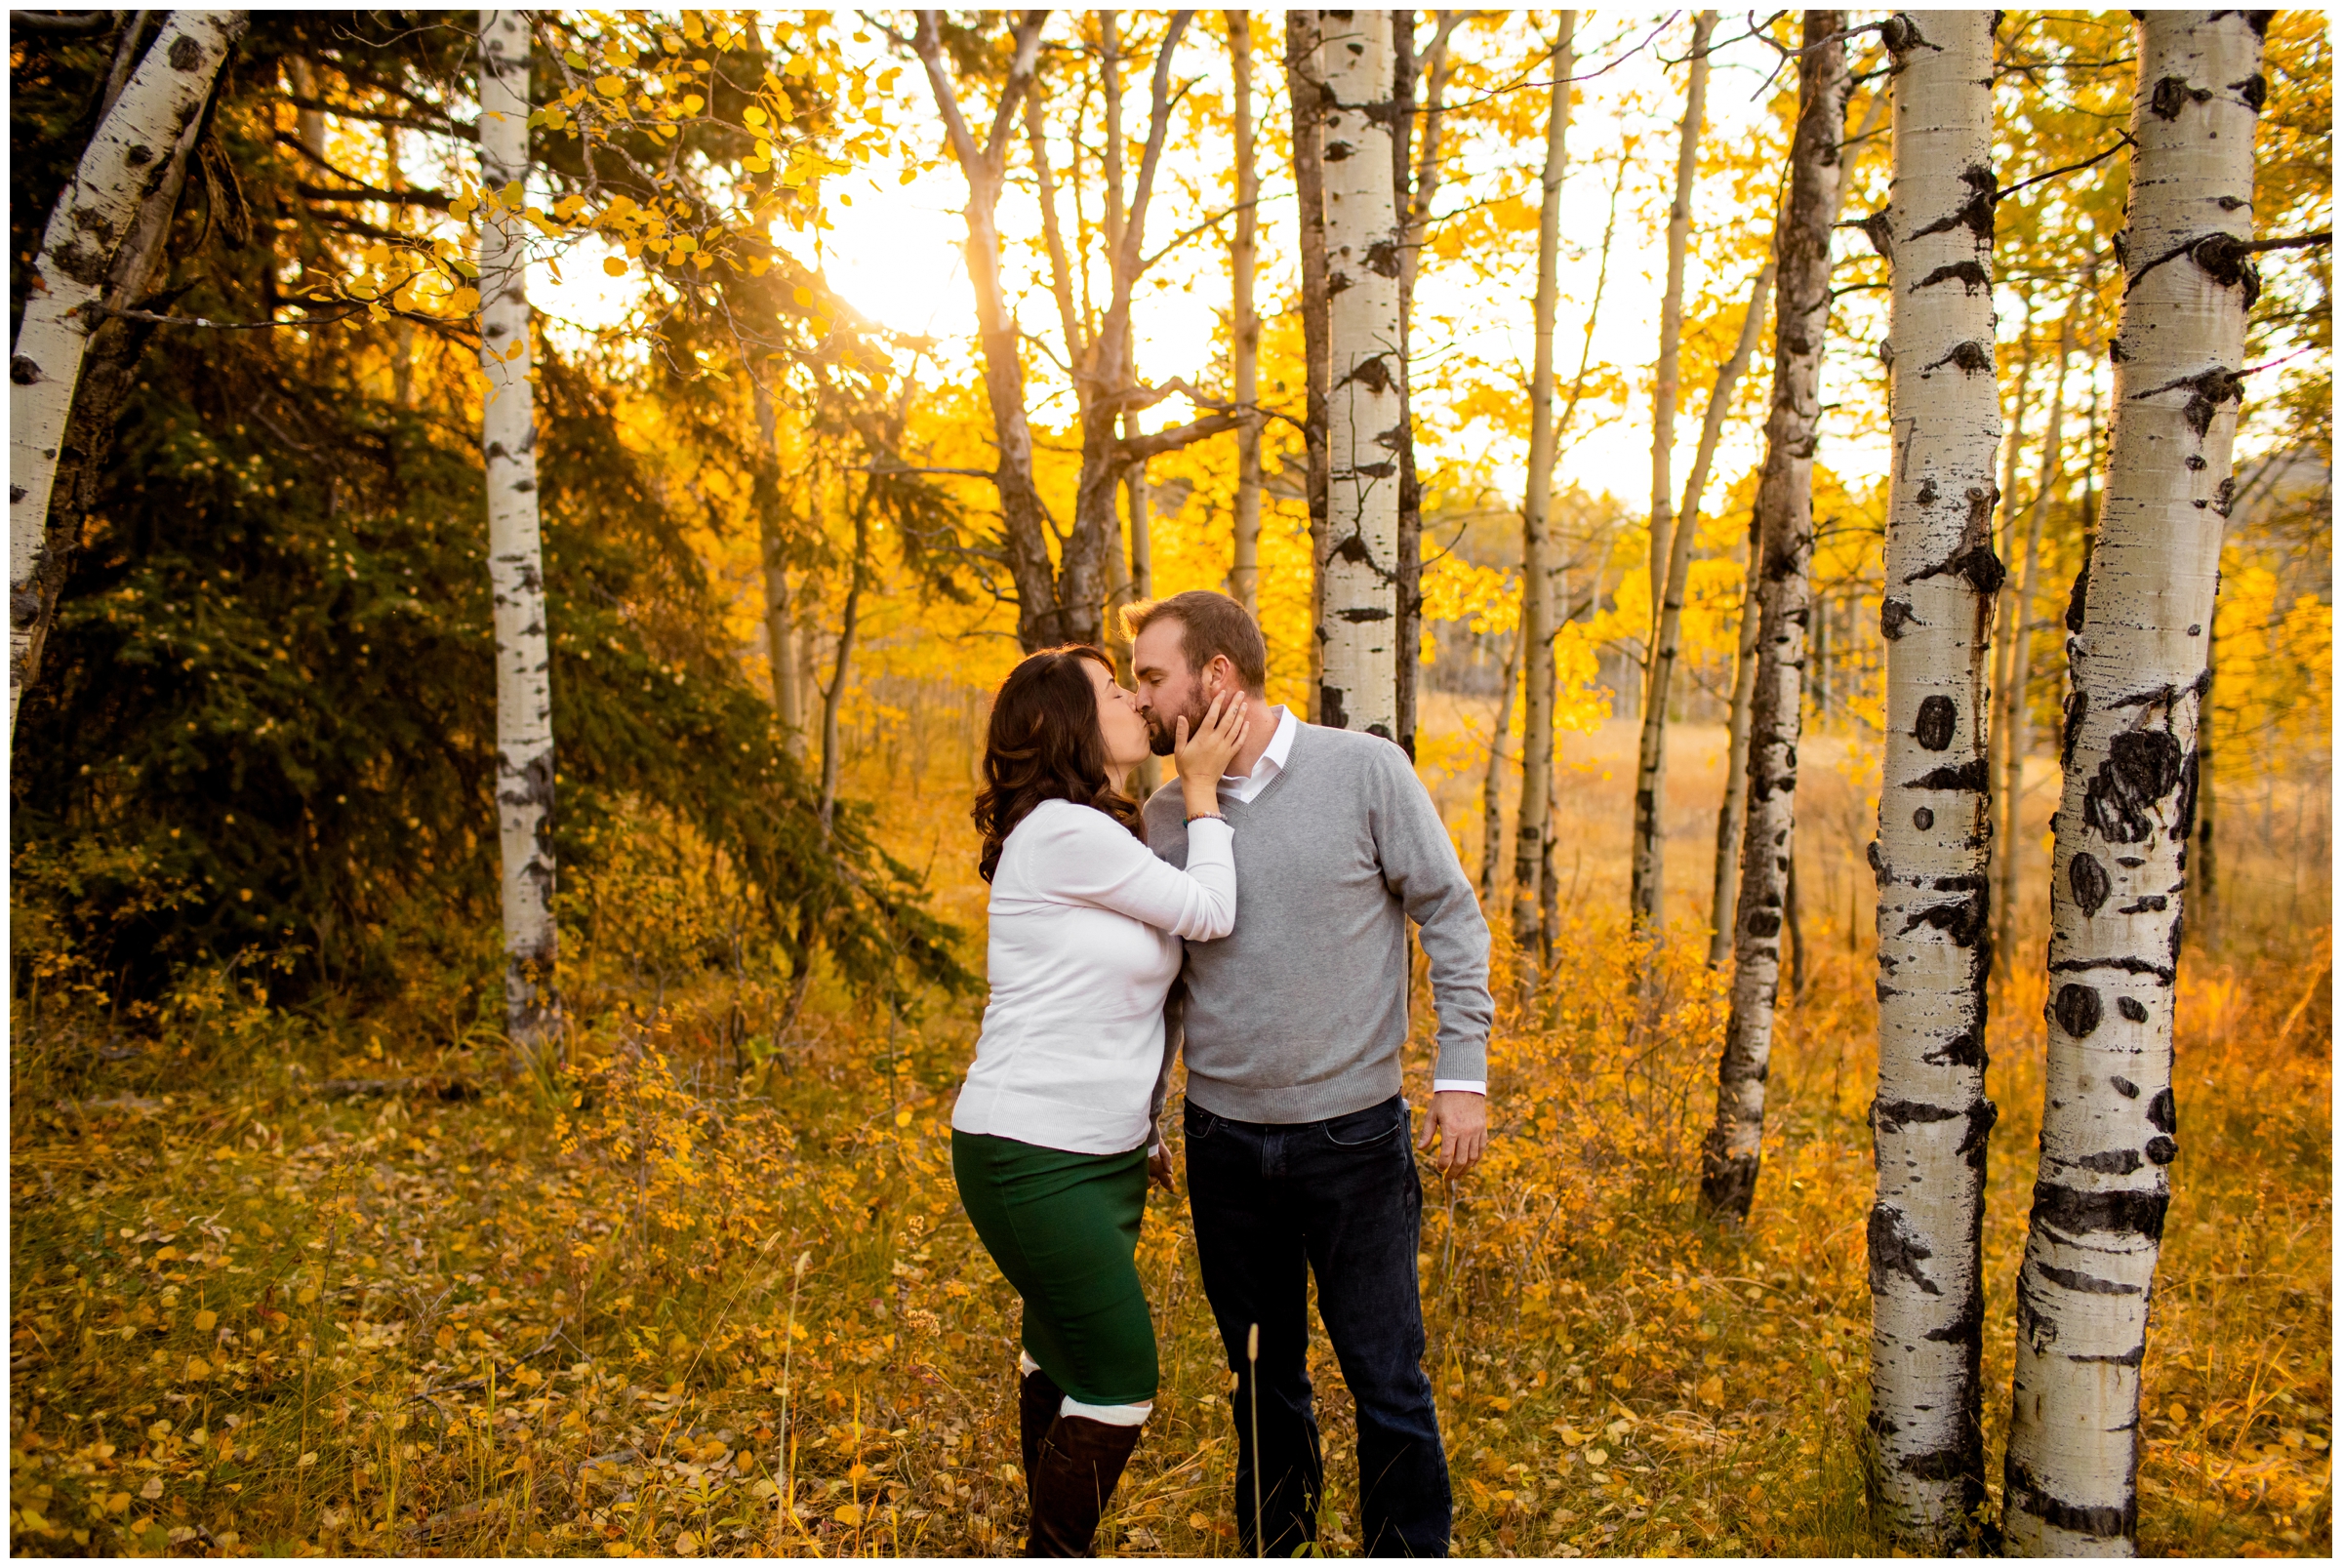 Colorado fall mountain engagement photos at Meyer Ranch Park by CO wedding photographer Plum Pretty Photography